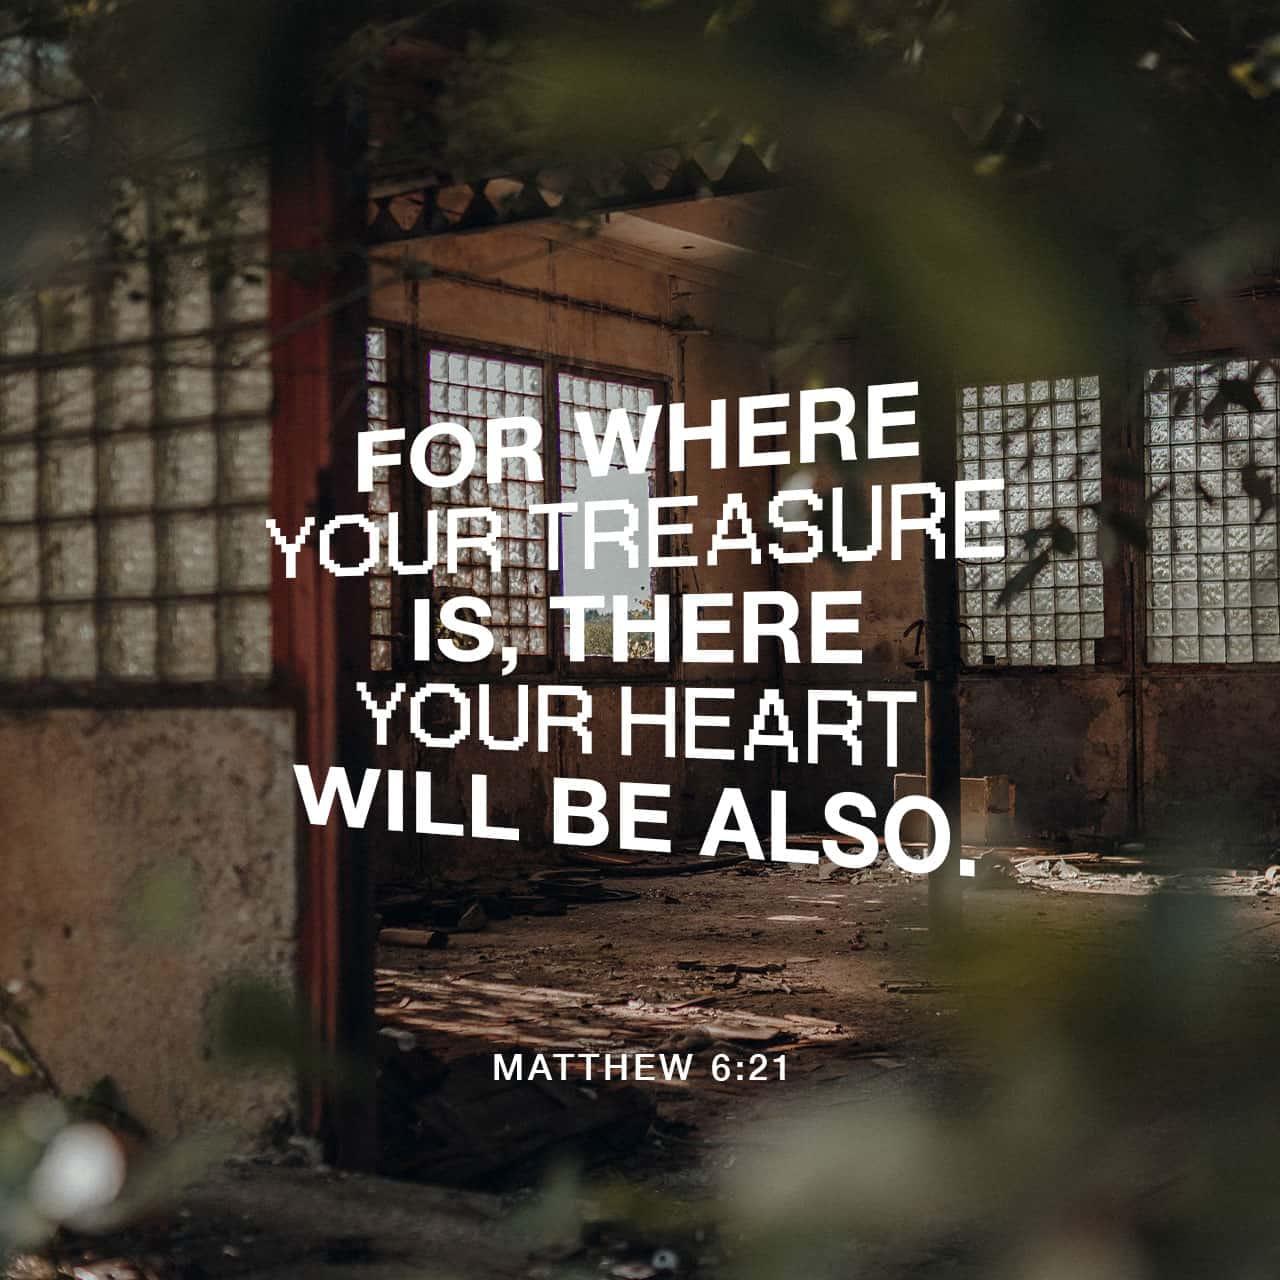 Bible Verse of the Day - day 86 - image 67200 (Matthew 6:21)